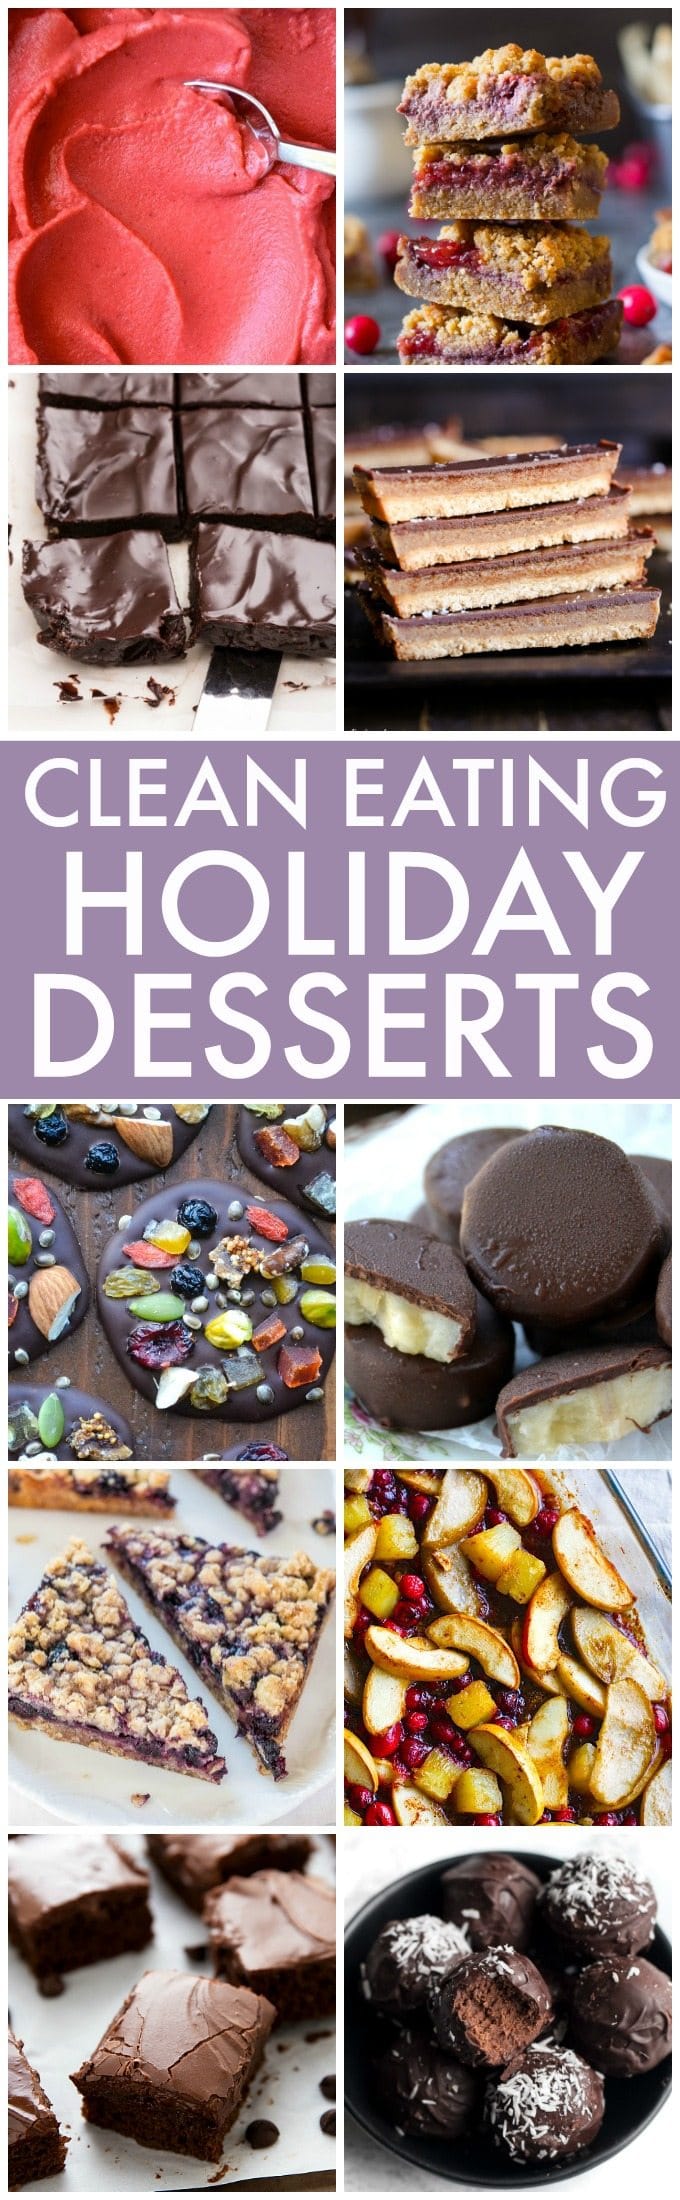 Clean Eating Holiday Desserts (V, GF, Paleo options)- The BEST Clean Eating and Healthy Holiday Desserts, snacks and sweets perfect for Christmas, the festive season, gifts or anytime- Flourless, muffins, bars, brownies, and sugar free options! {vegan, gluten free, paleo recipe options}- thebigmansworld.com